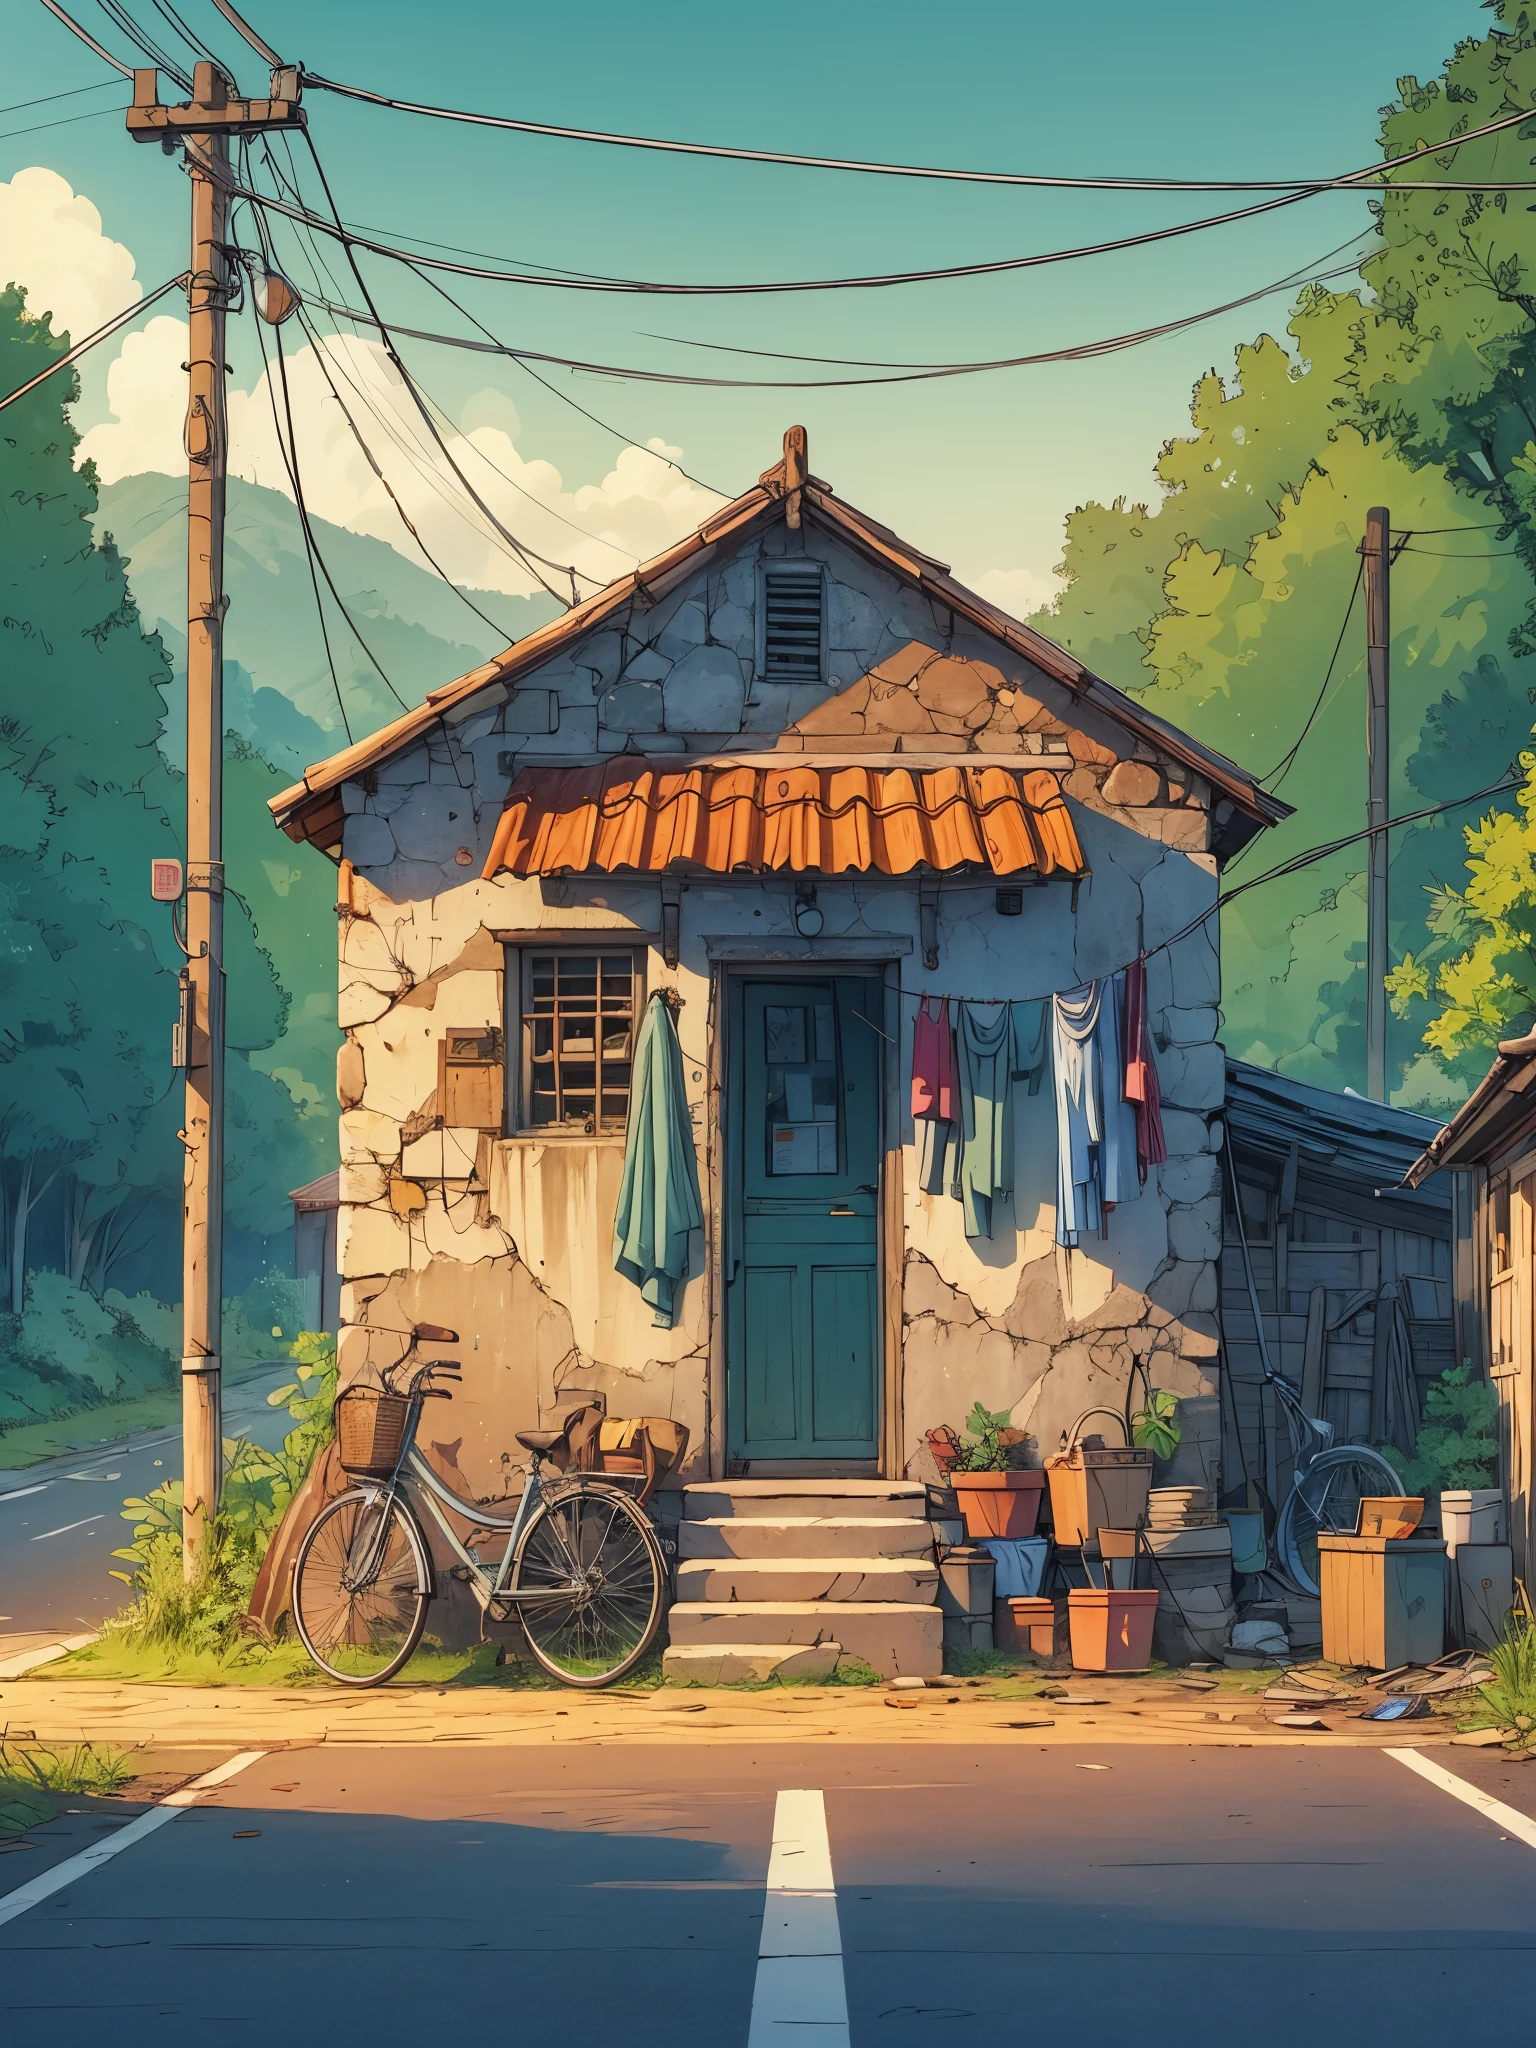 Draw an anime simple art scene of an old indian stone hut at the end of road in village, cracked walls, wires, bicycle parked outside, clothes drying on wire outside, faded paint, late evening, broken door, forest around, single light bulb hanging outside, no human, vibrant color tones, dim light